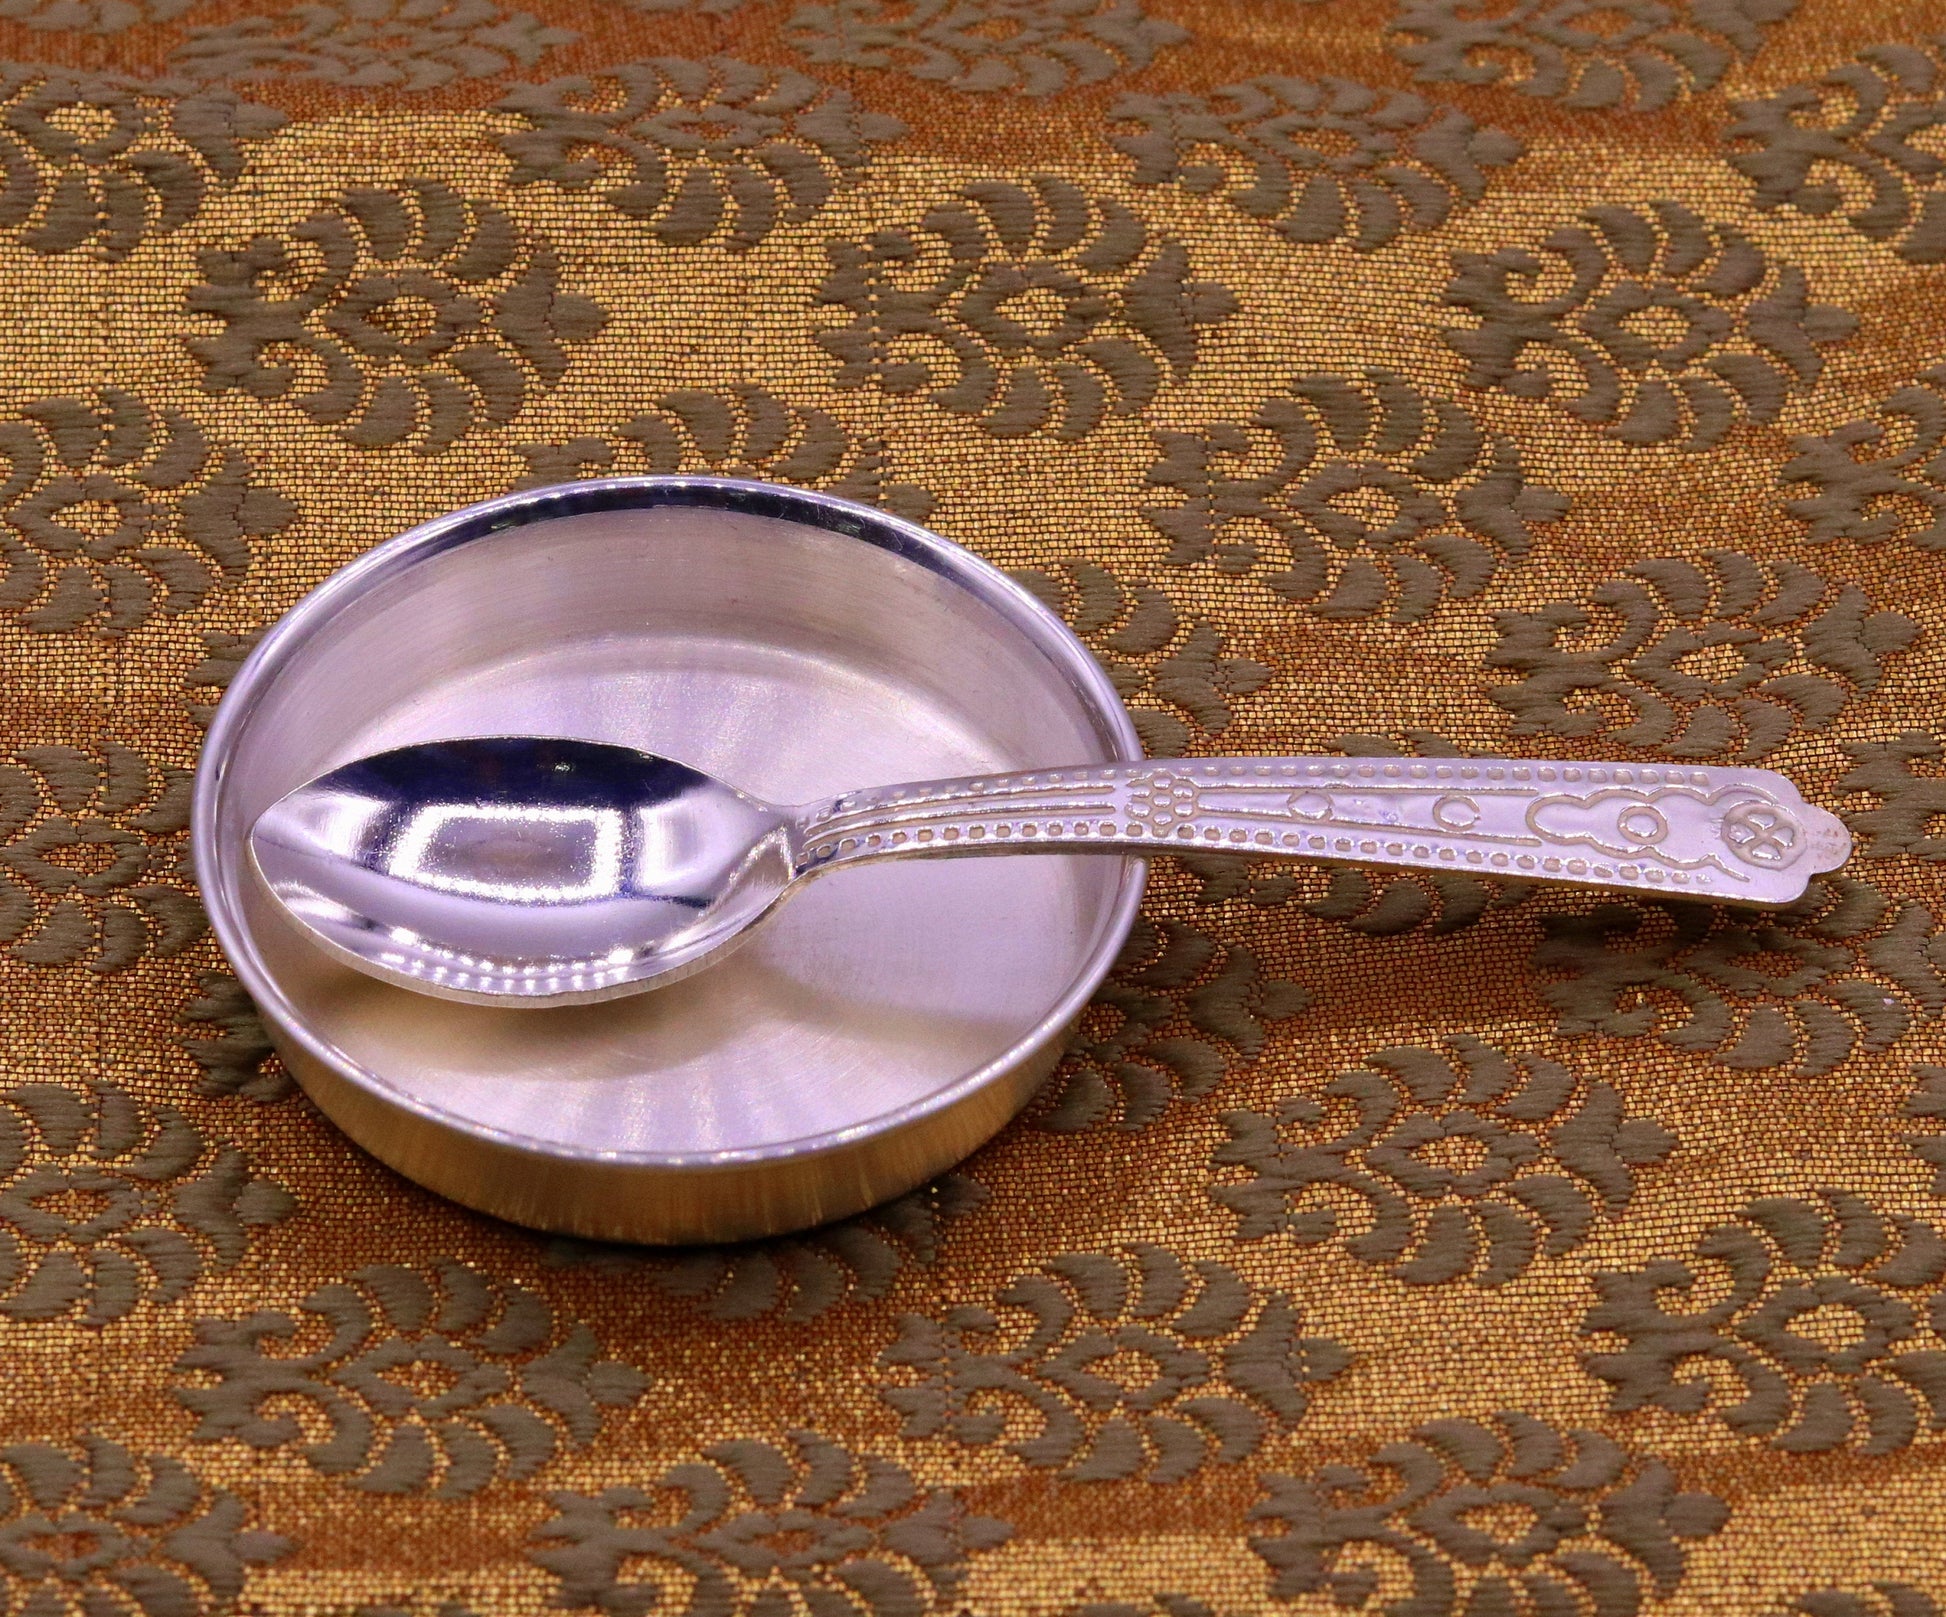 99.99 pure silver handmade silver small baby plate and spoon set, silver has antibacterial properties for stay healthy, silver vessels sv10 - TRIBAL ORNAMENTS